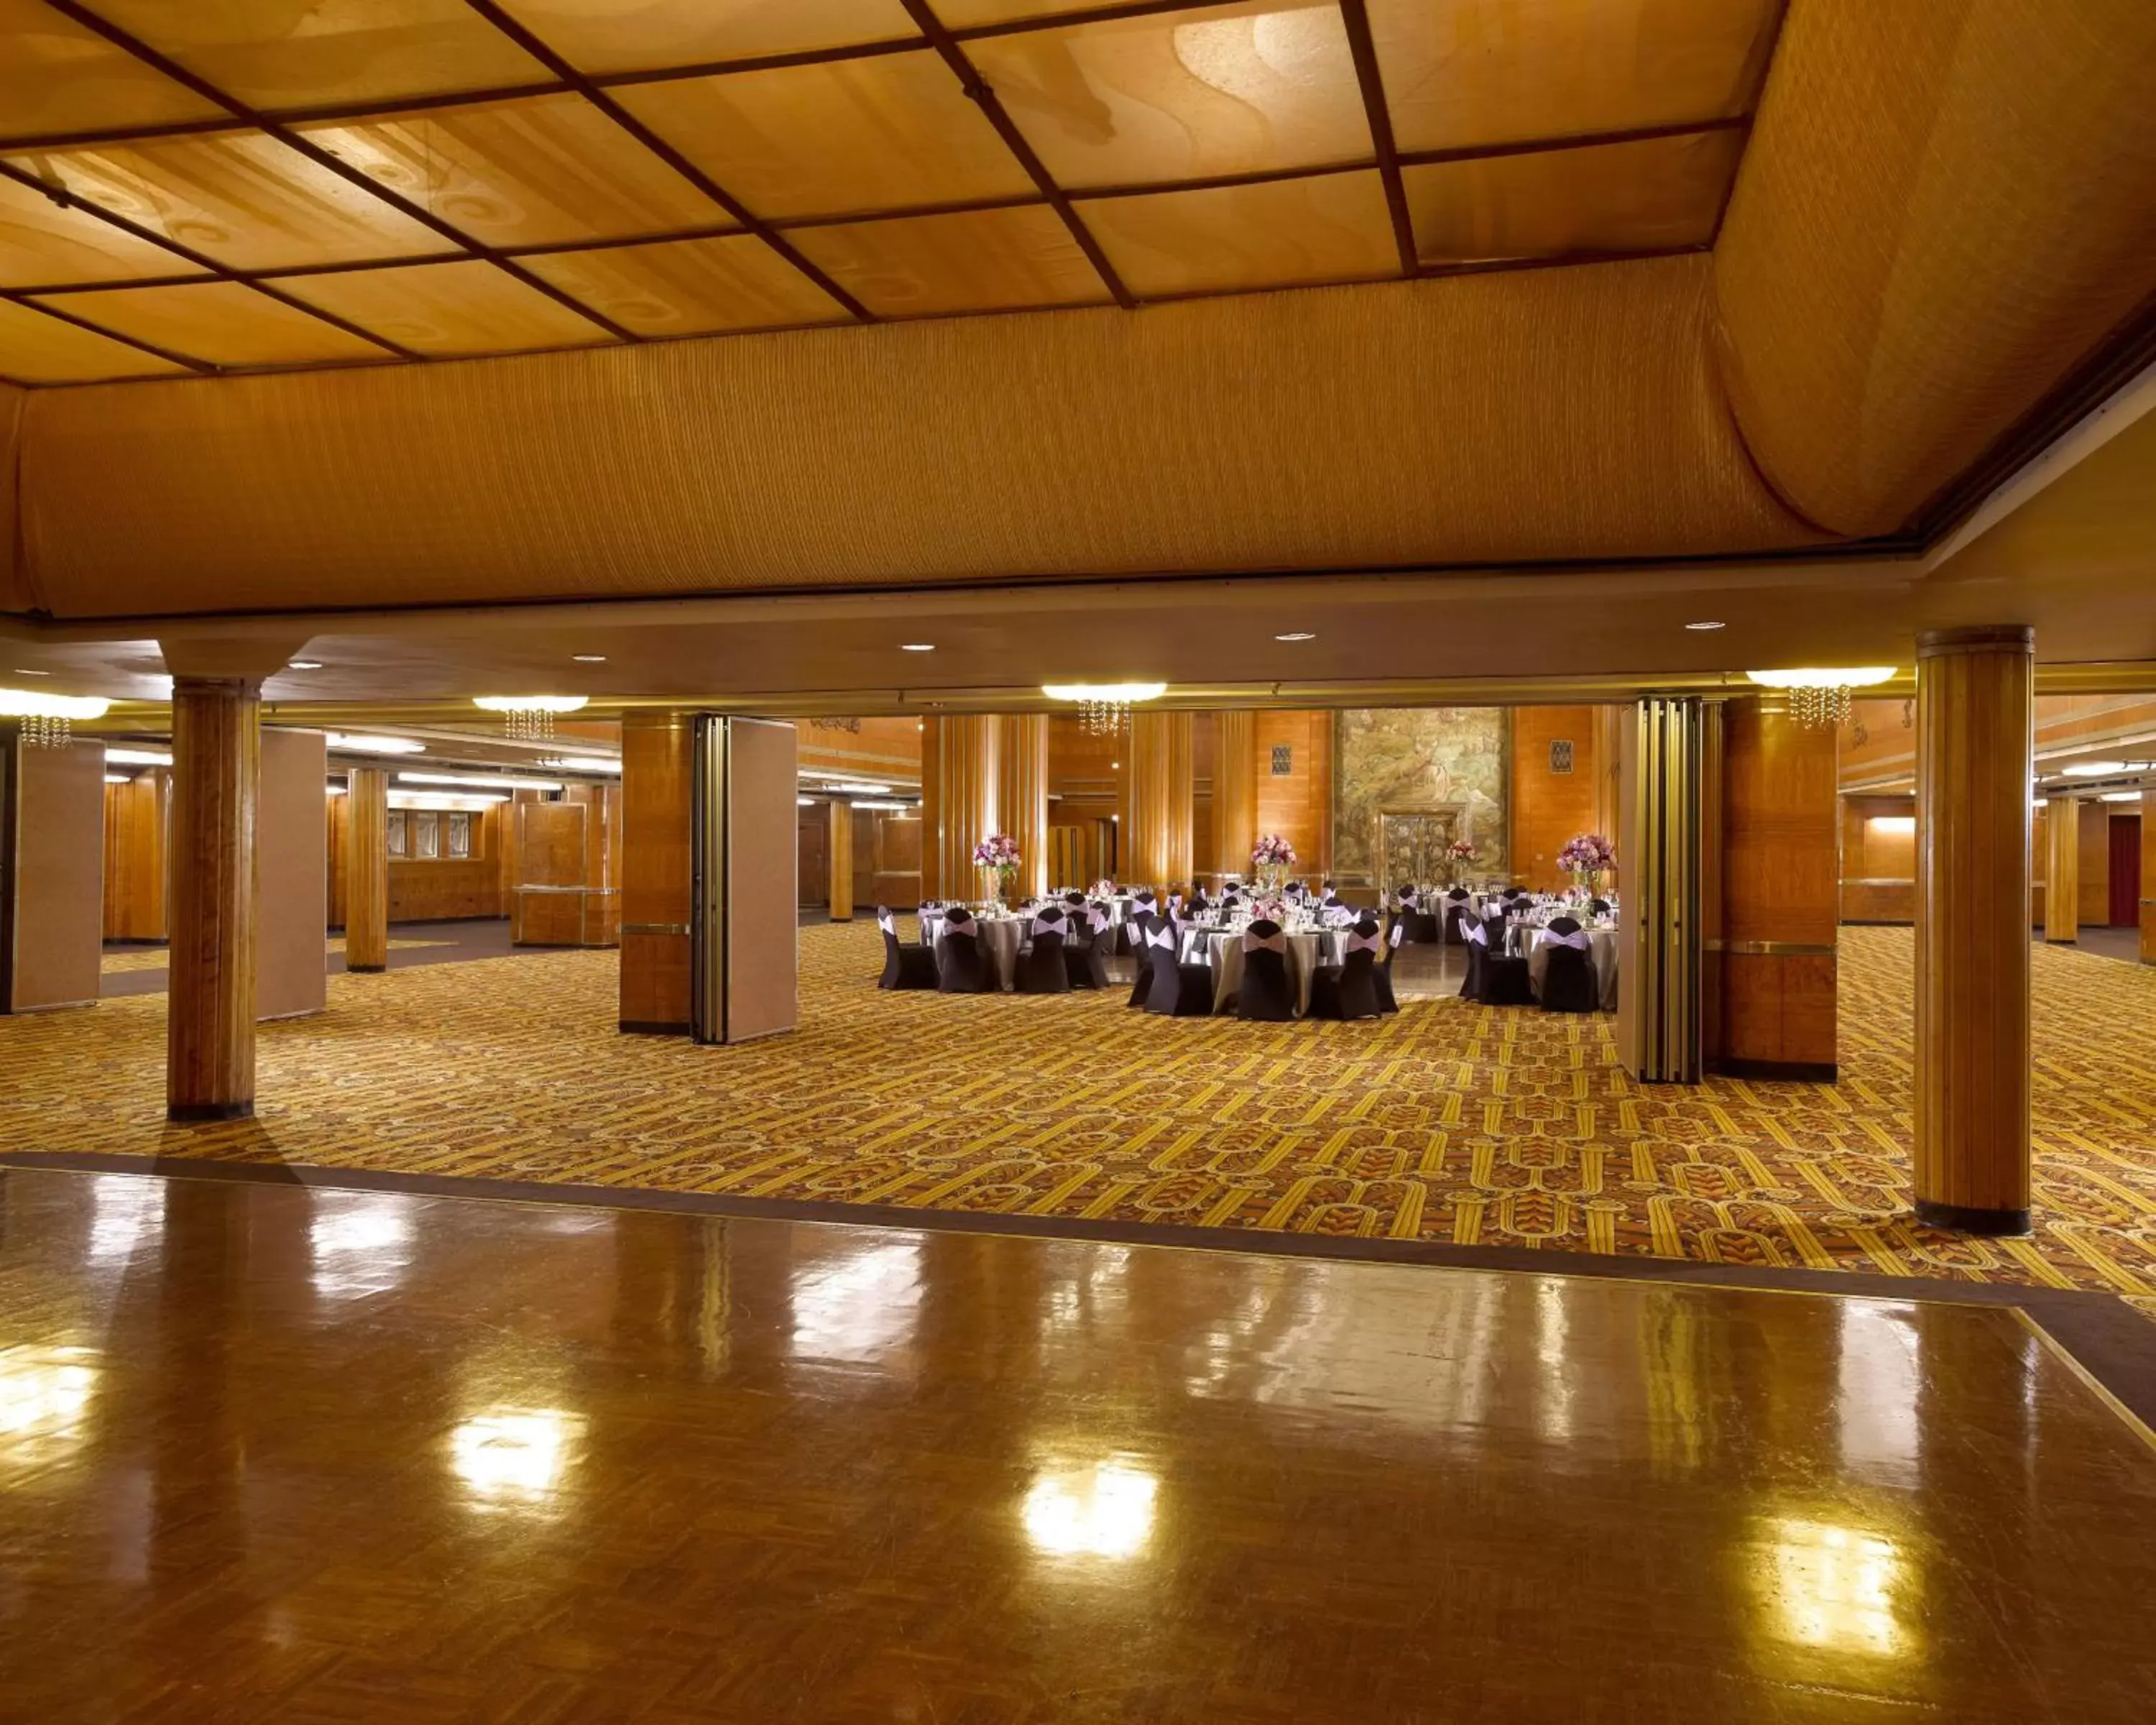 Banquet/Function facilities, Banquet Facilities in The Queen Mary